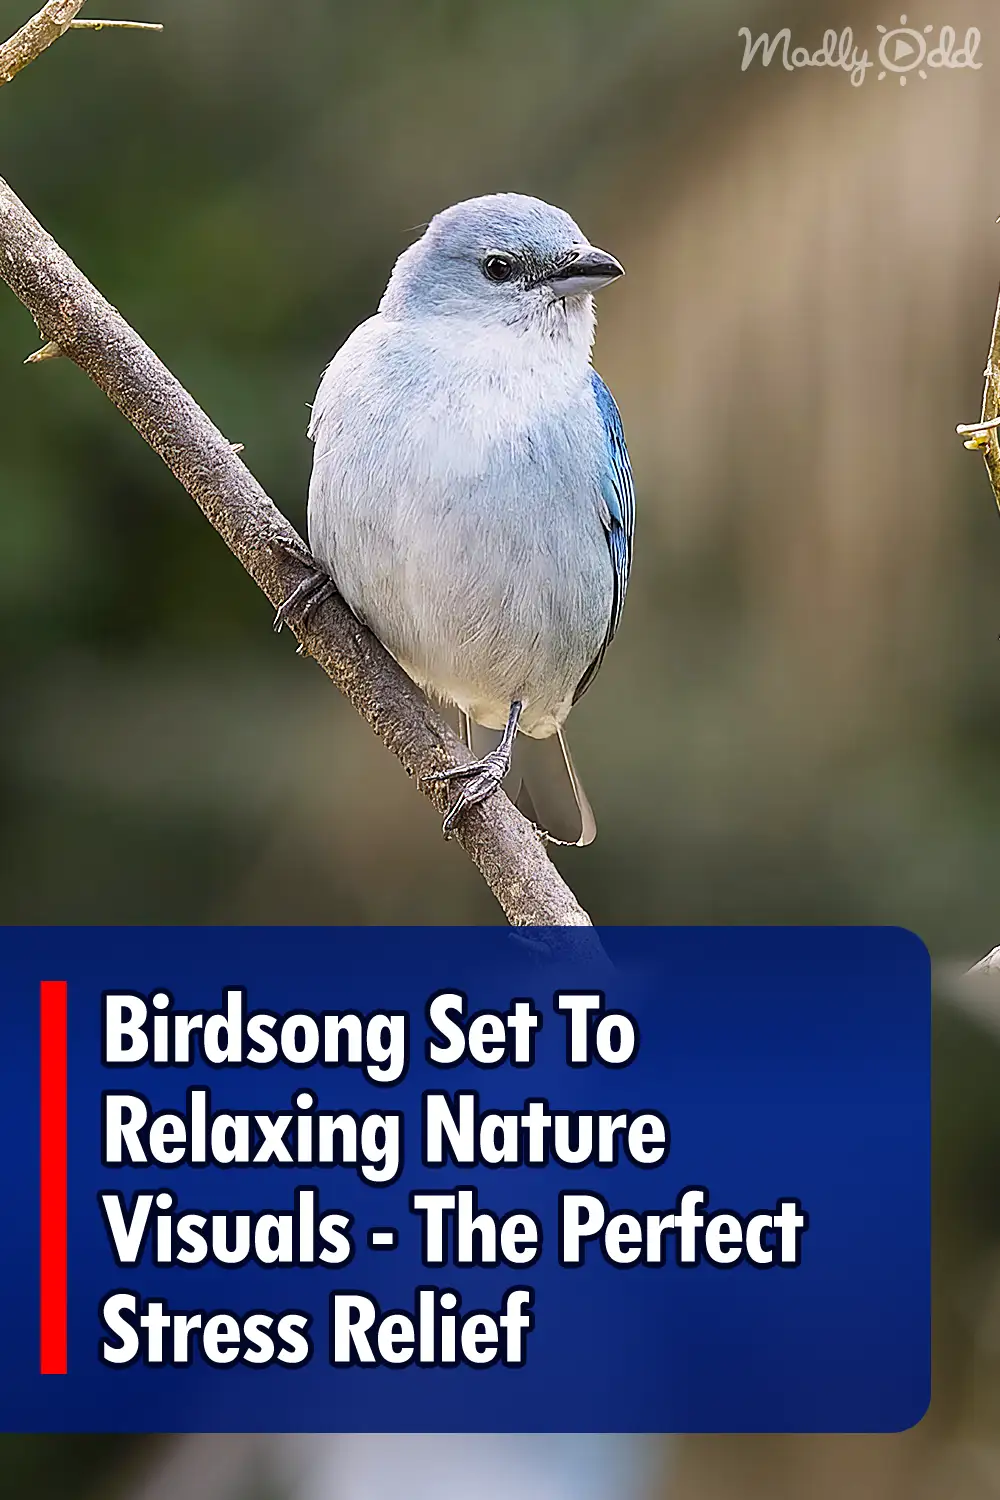 Birdsong Set To Relaxing Nature Visuals - The Perfect Stress Relief